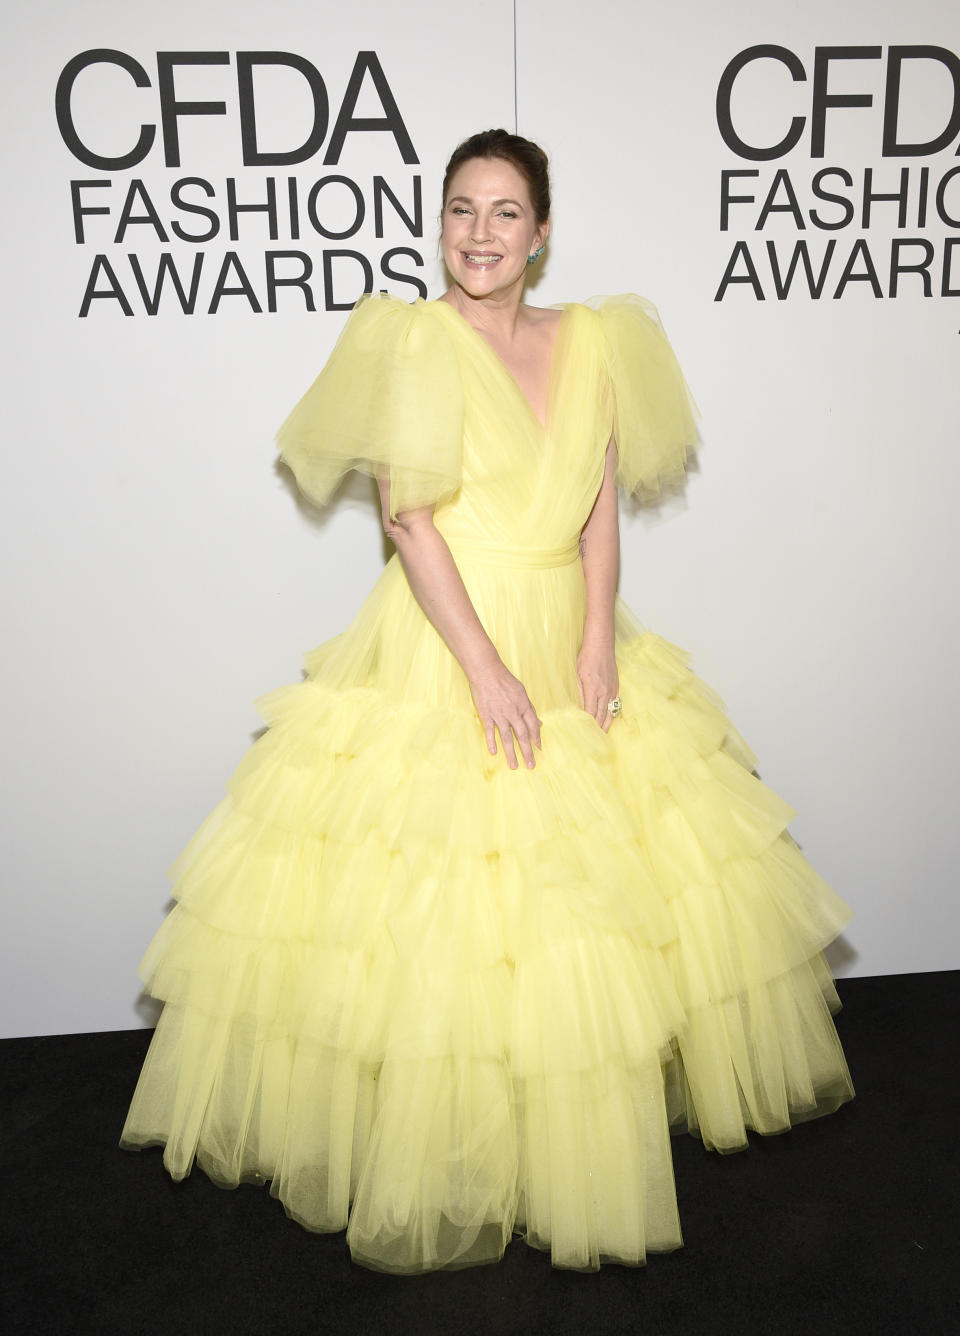 FILE - Drew Barrymore attends the CFDA Fashion Awards on Wednesday, Nov. 10, 2021, in New York. Barrymore turns 48 on Feb. 22. (Photo by Evan Agostini/Invision/AP, File)